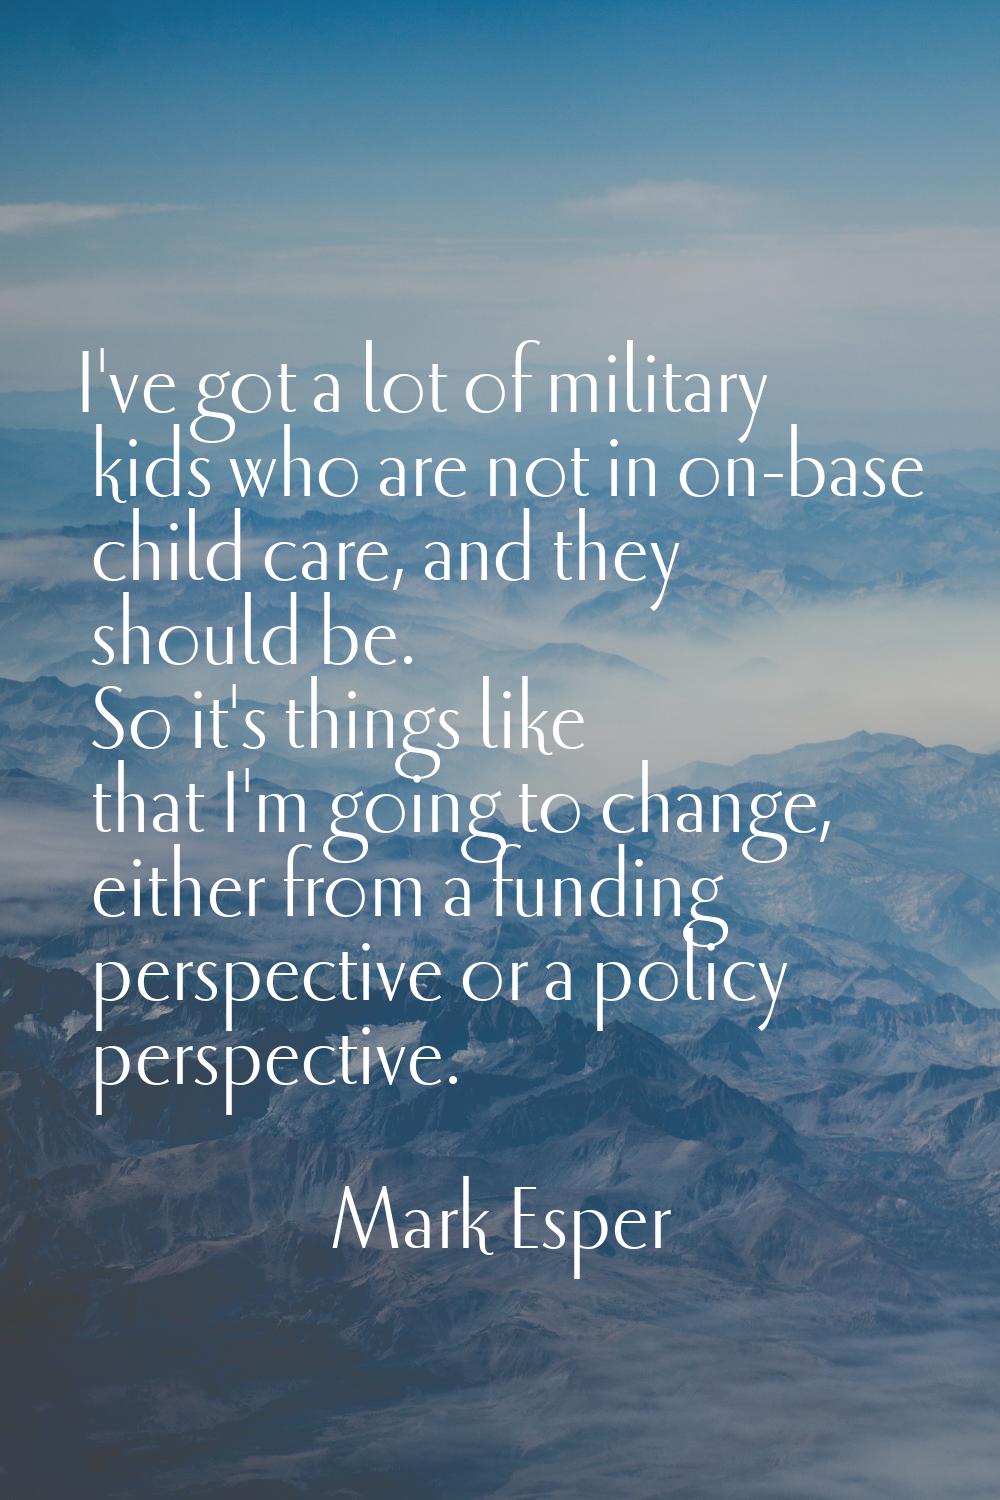 I've got a lot of military kids who are not in on-base child care, and they should be. So it's thin